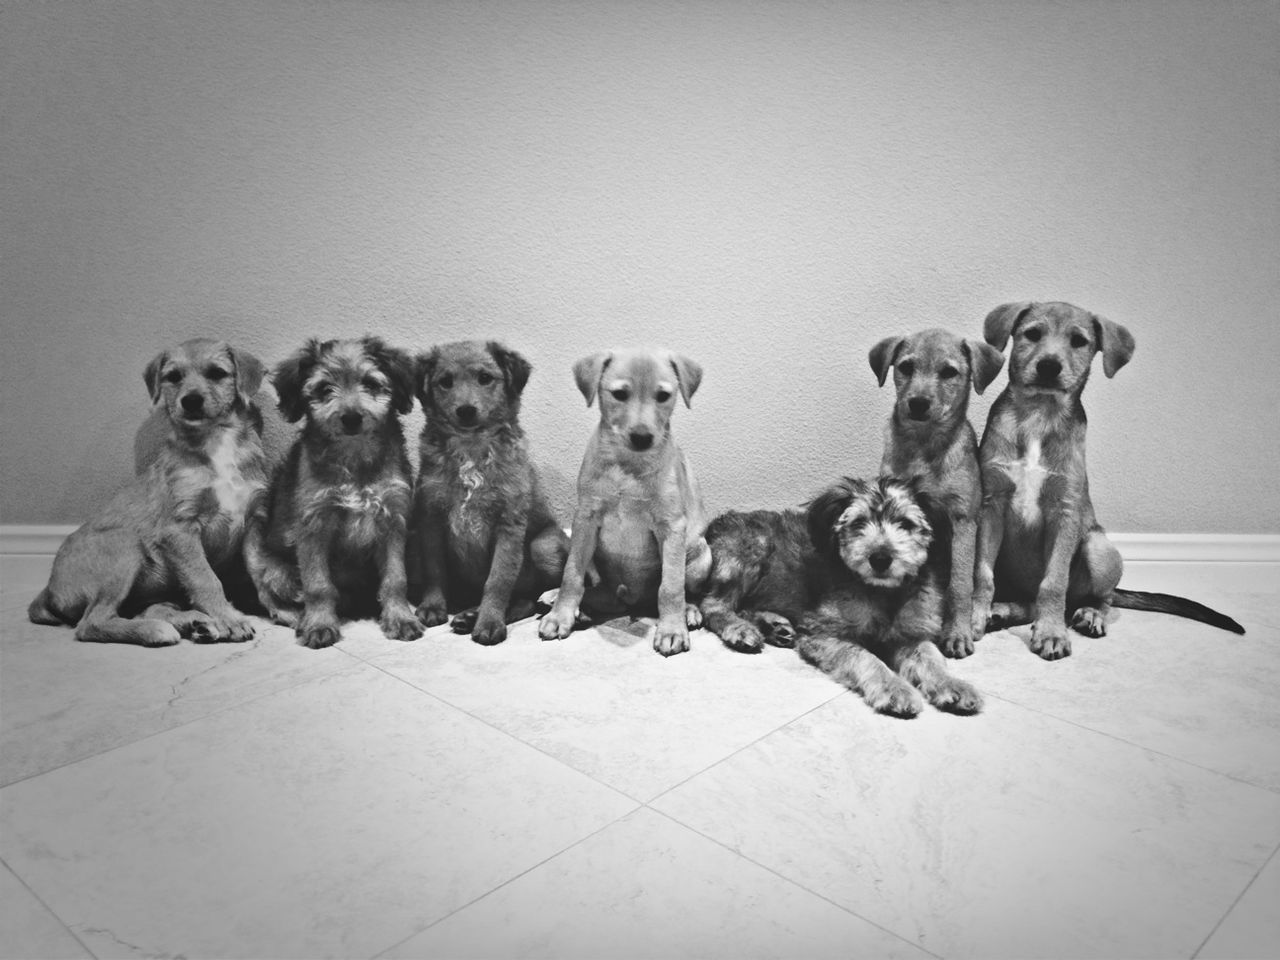 animal themes, domestic animals, mammal, pets, dog, togetherness, indoors, two animals, wall - building feature, young animal, relaxation, copy space, day, full length, high angle view, sitting, one animal, three animals, no people, looking at camera